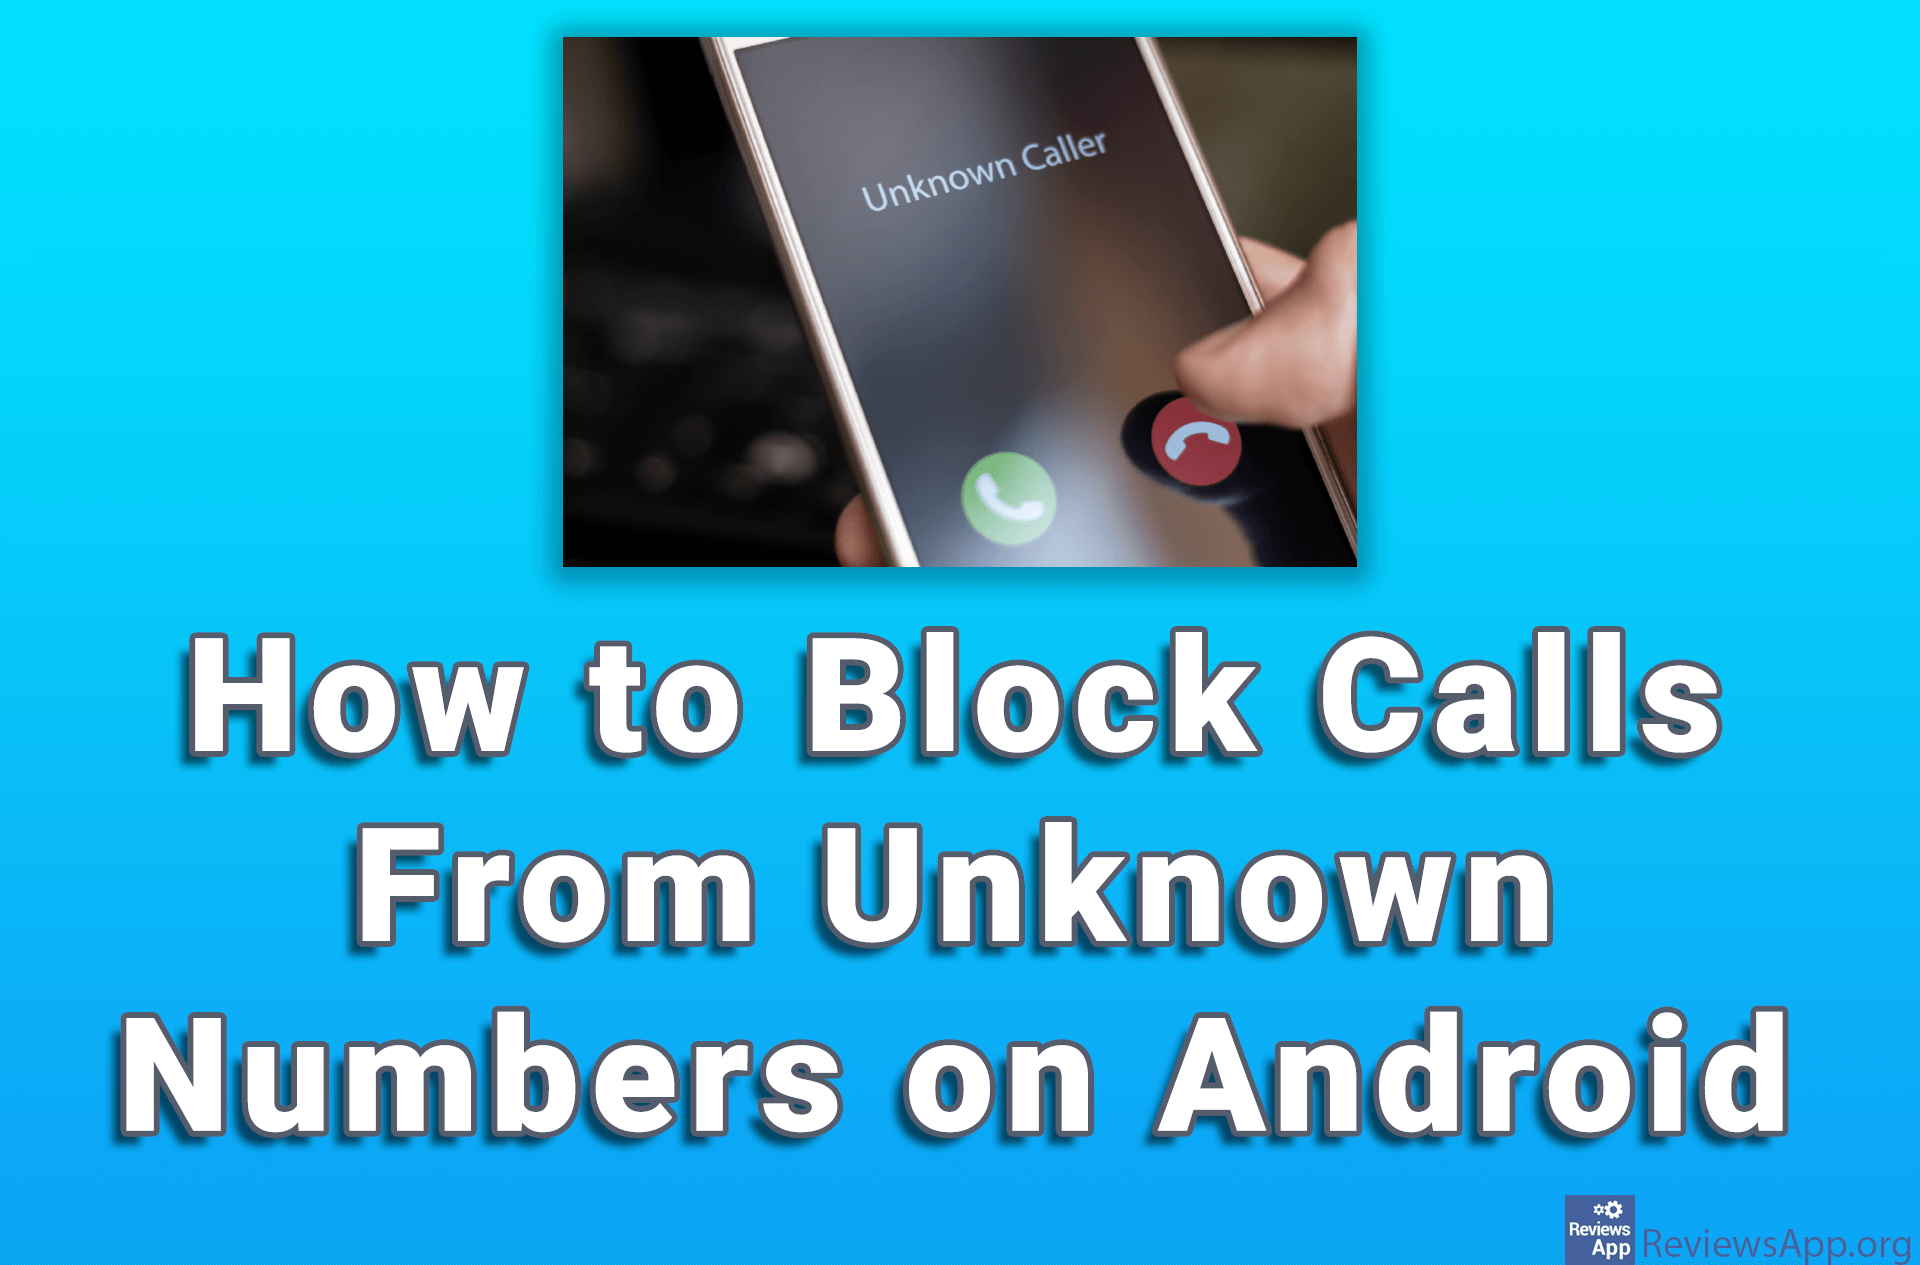 How to Block Calls From Unknown Numbers on Android